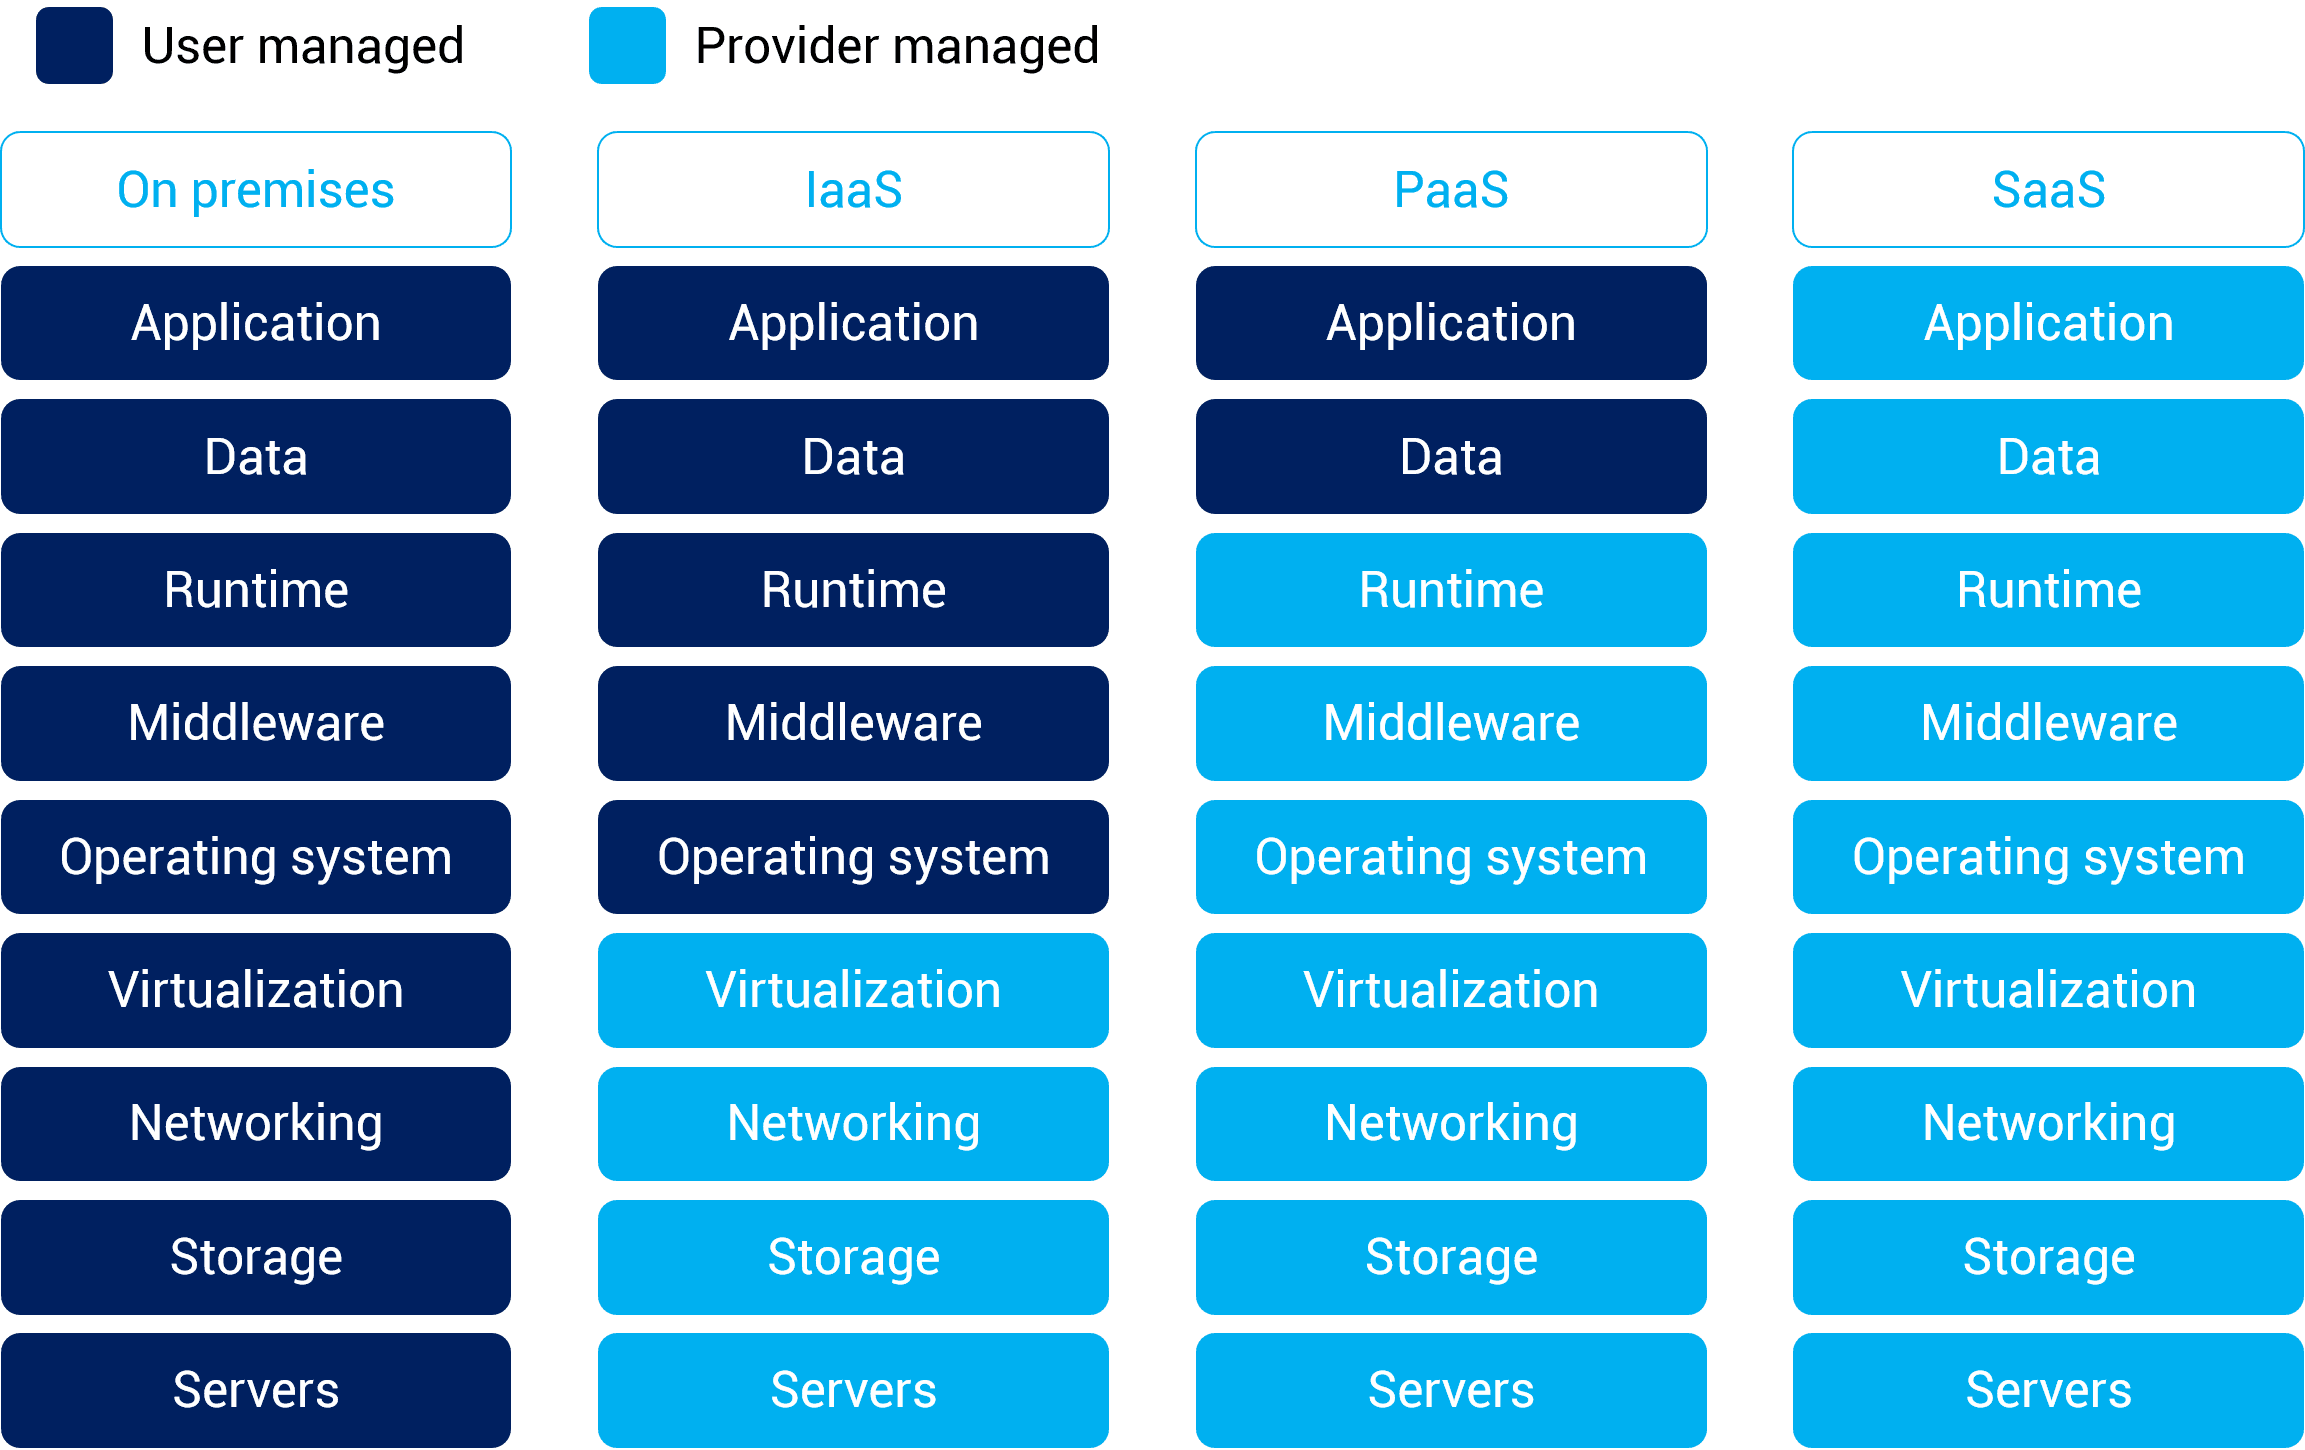 The diagram shows different types of cloud computing services. The services are Infrastructure as a Service (IaaS), Platform as a Service (PaaS), and Software as a Service (SaaS). IaaS provides virtualized computing resources over the internet. PaaS provides a platform for developers to build, deploy, and manage applications without worrying about the underlying infrastructure. SaaS provides applications that are hosted and managed by a cloud provider.